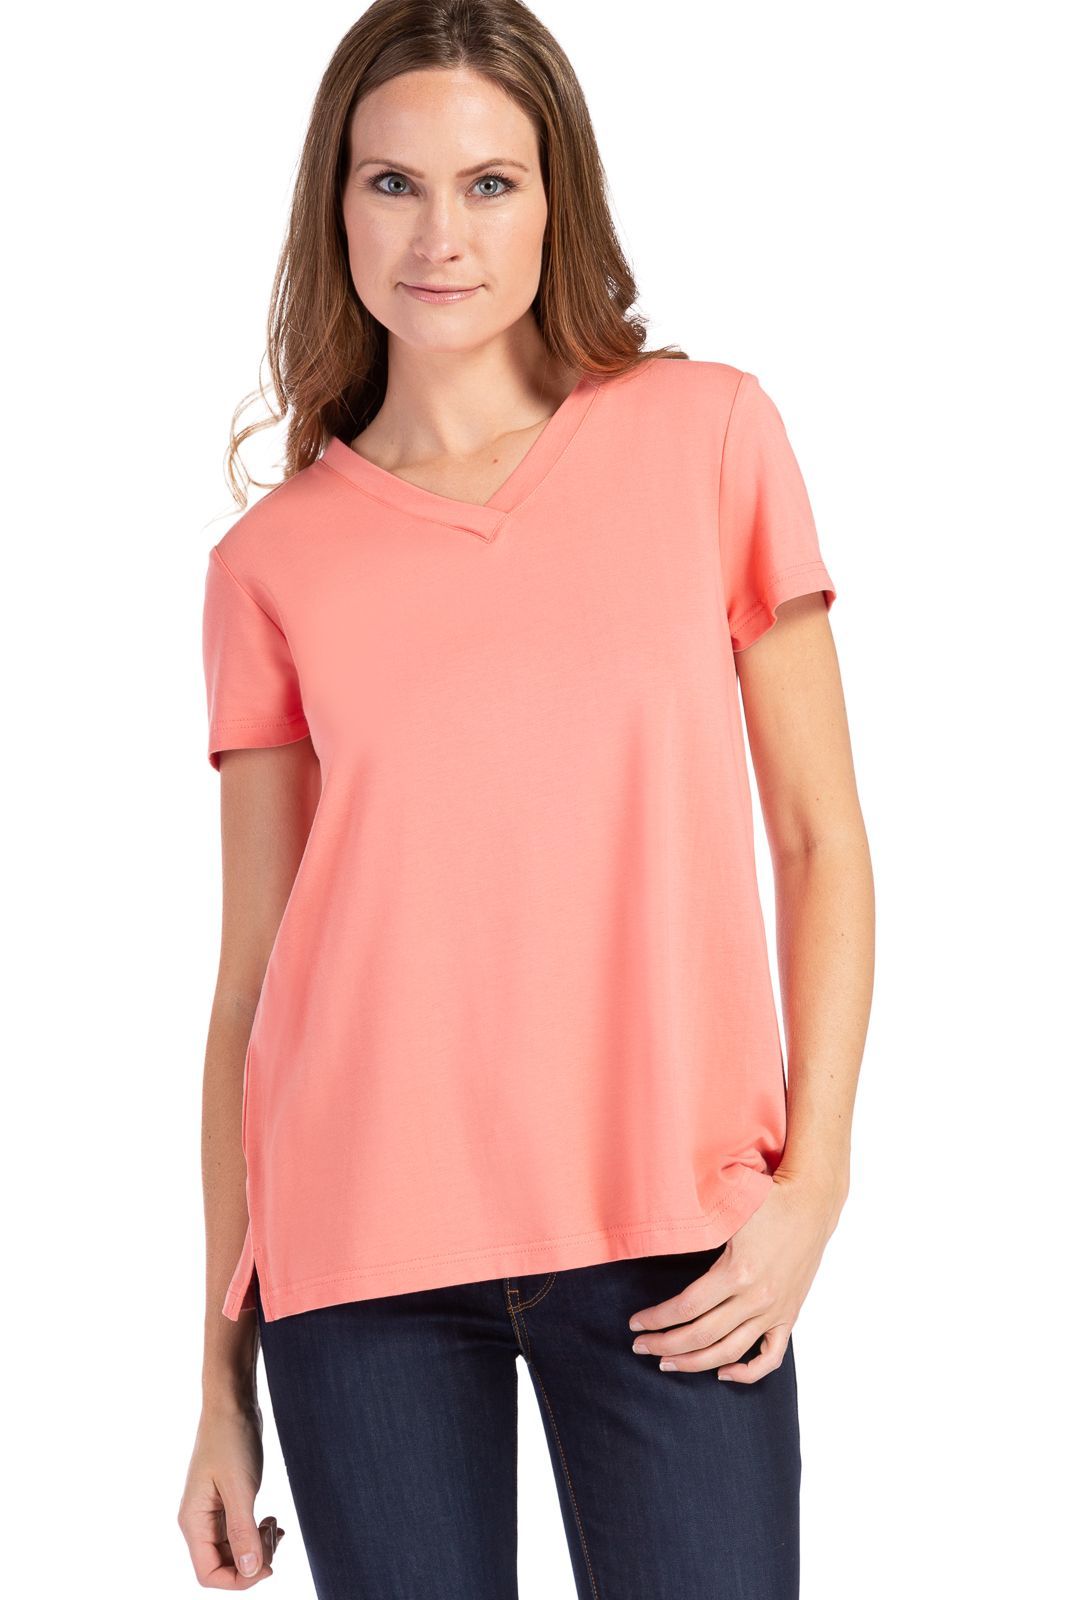  Fishers Finery V Neck Tee Shirt For Women - Sustainable  Earth Conscious Clothing